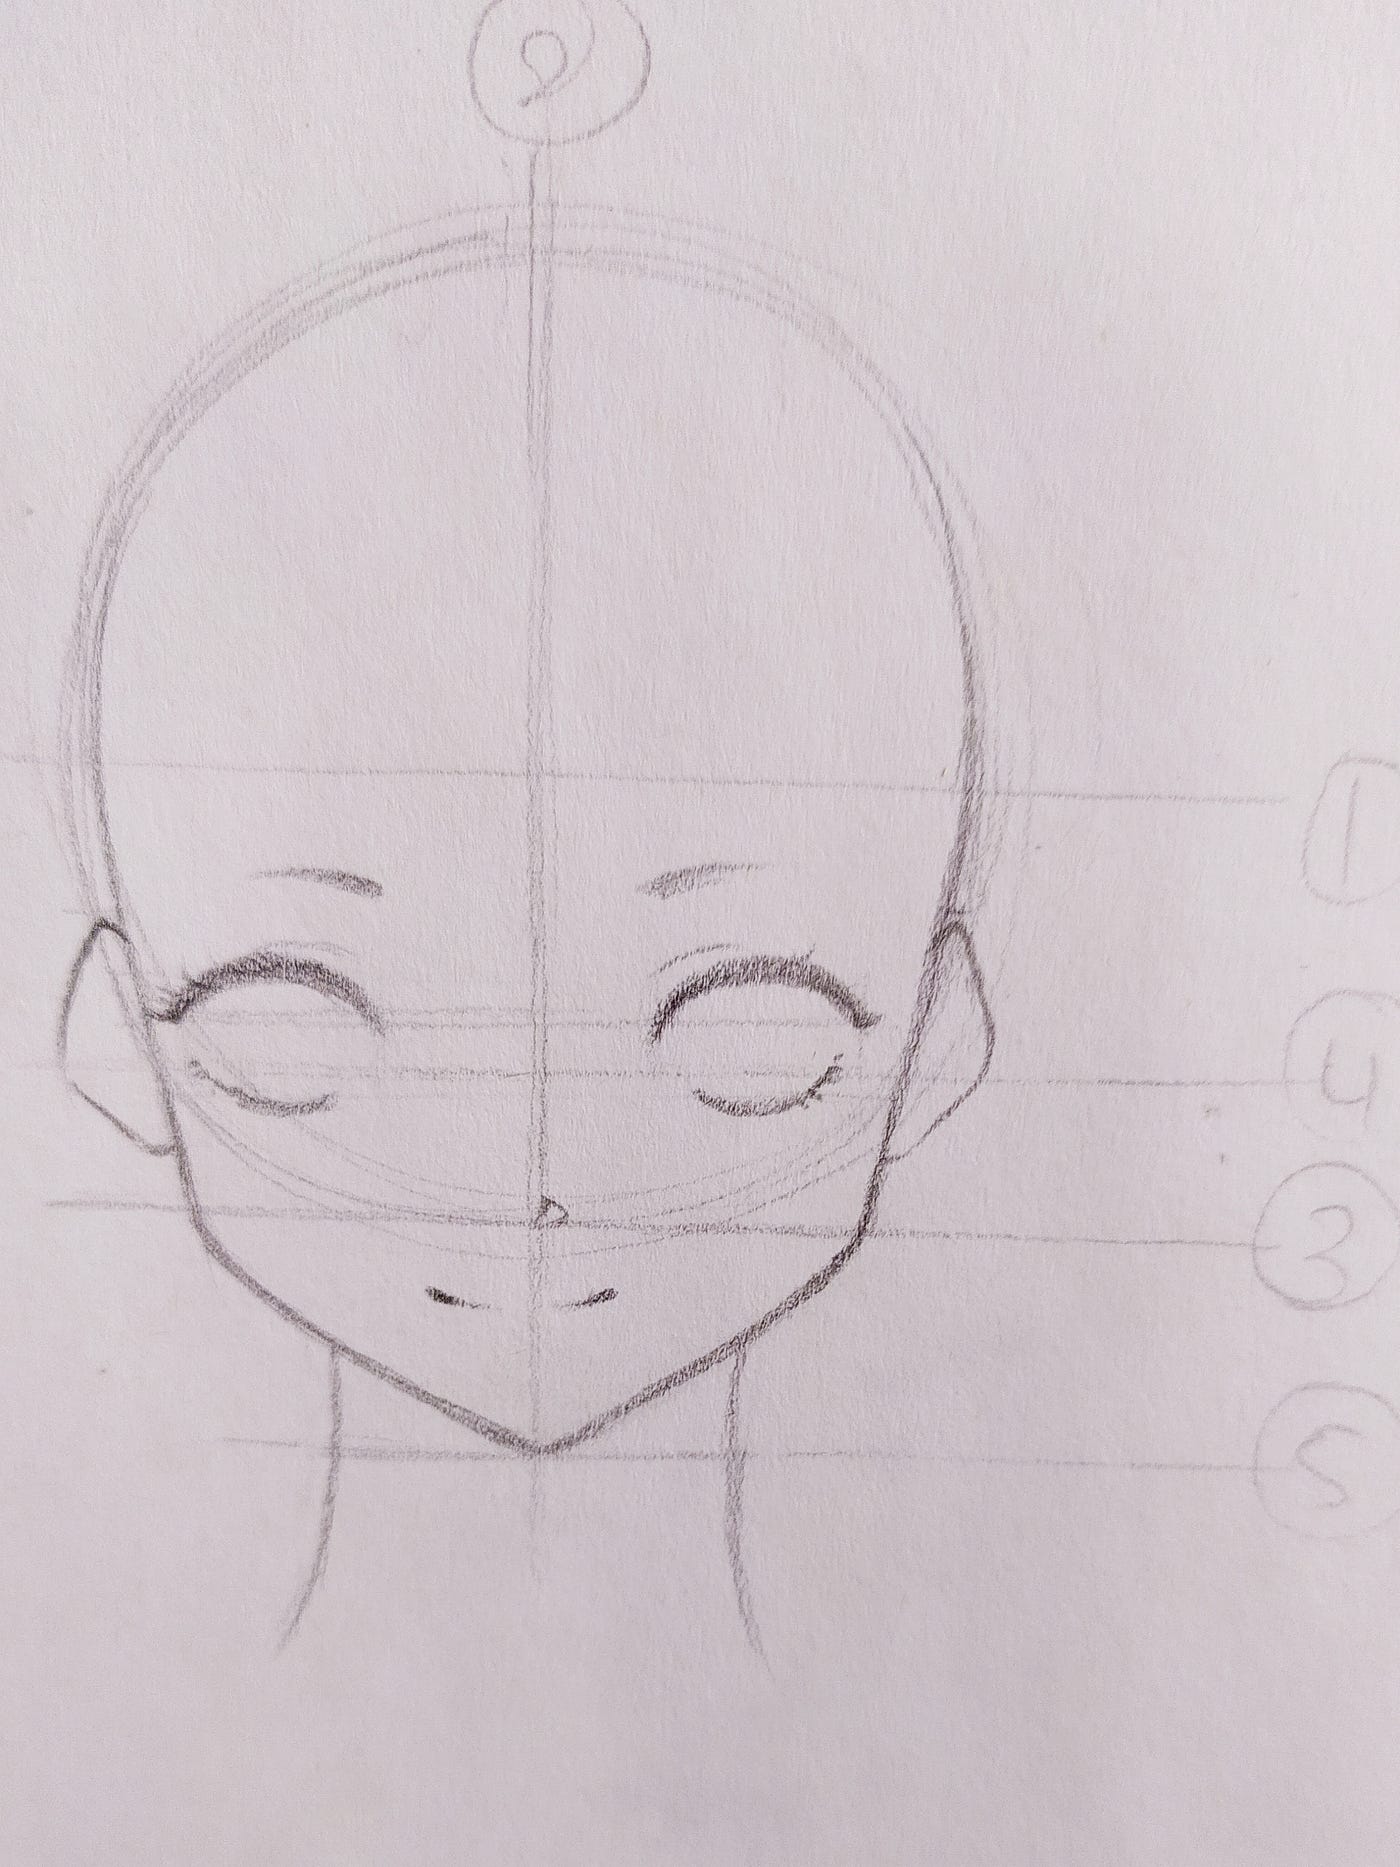 Steps to Draw Easy People, how to draw a simple anime girl step 6